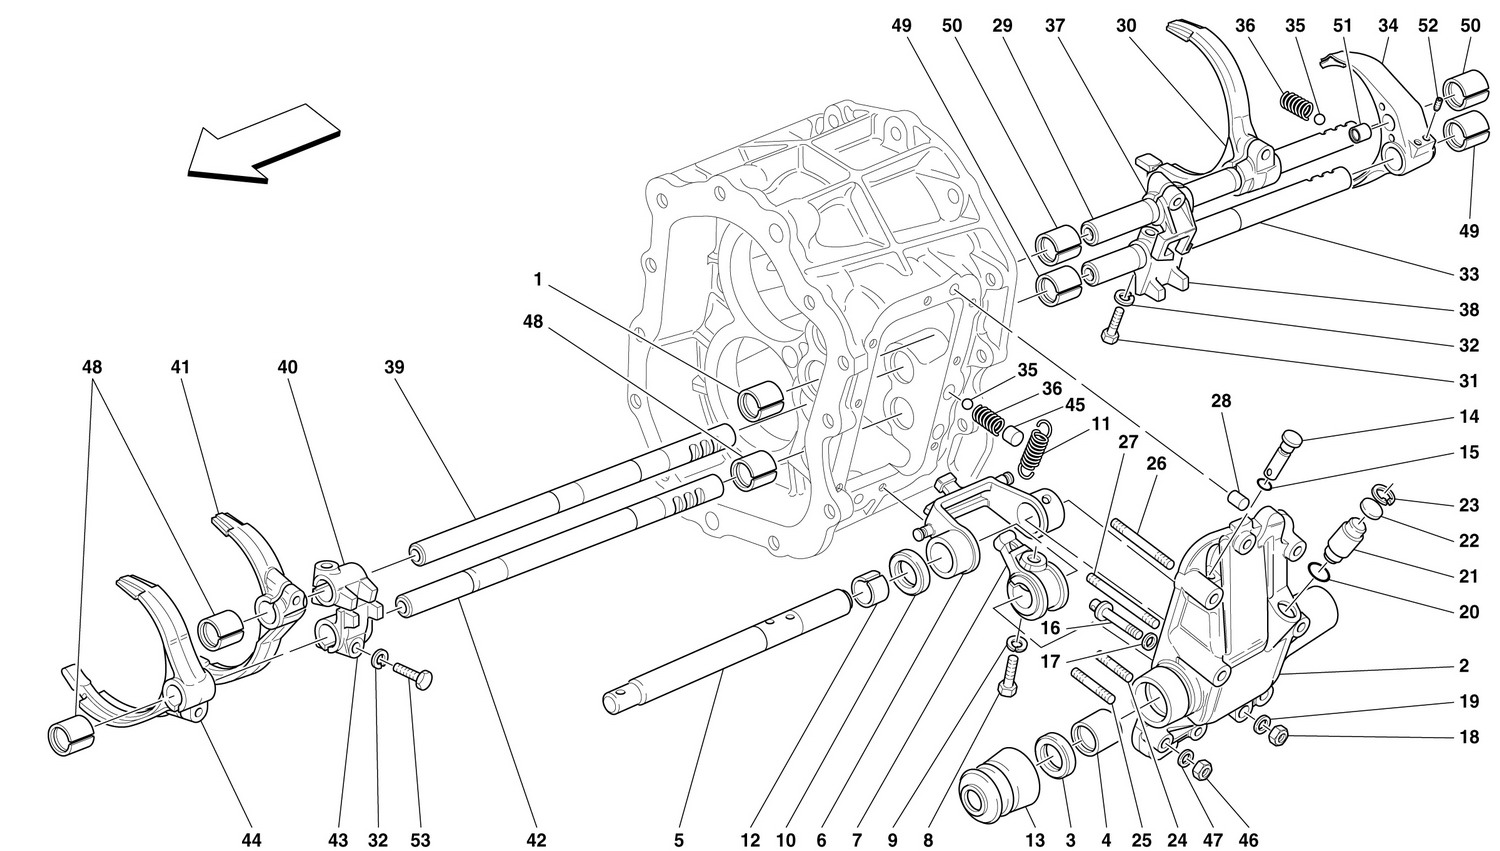 Schematic: Inside Gearbox Controls -Not For 456 Gta